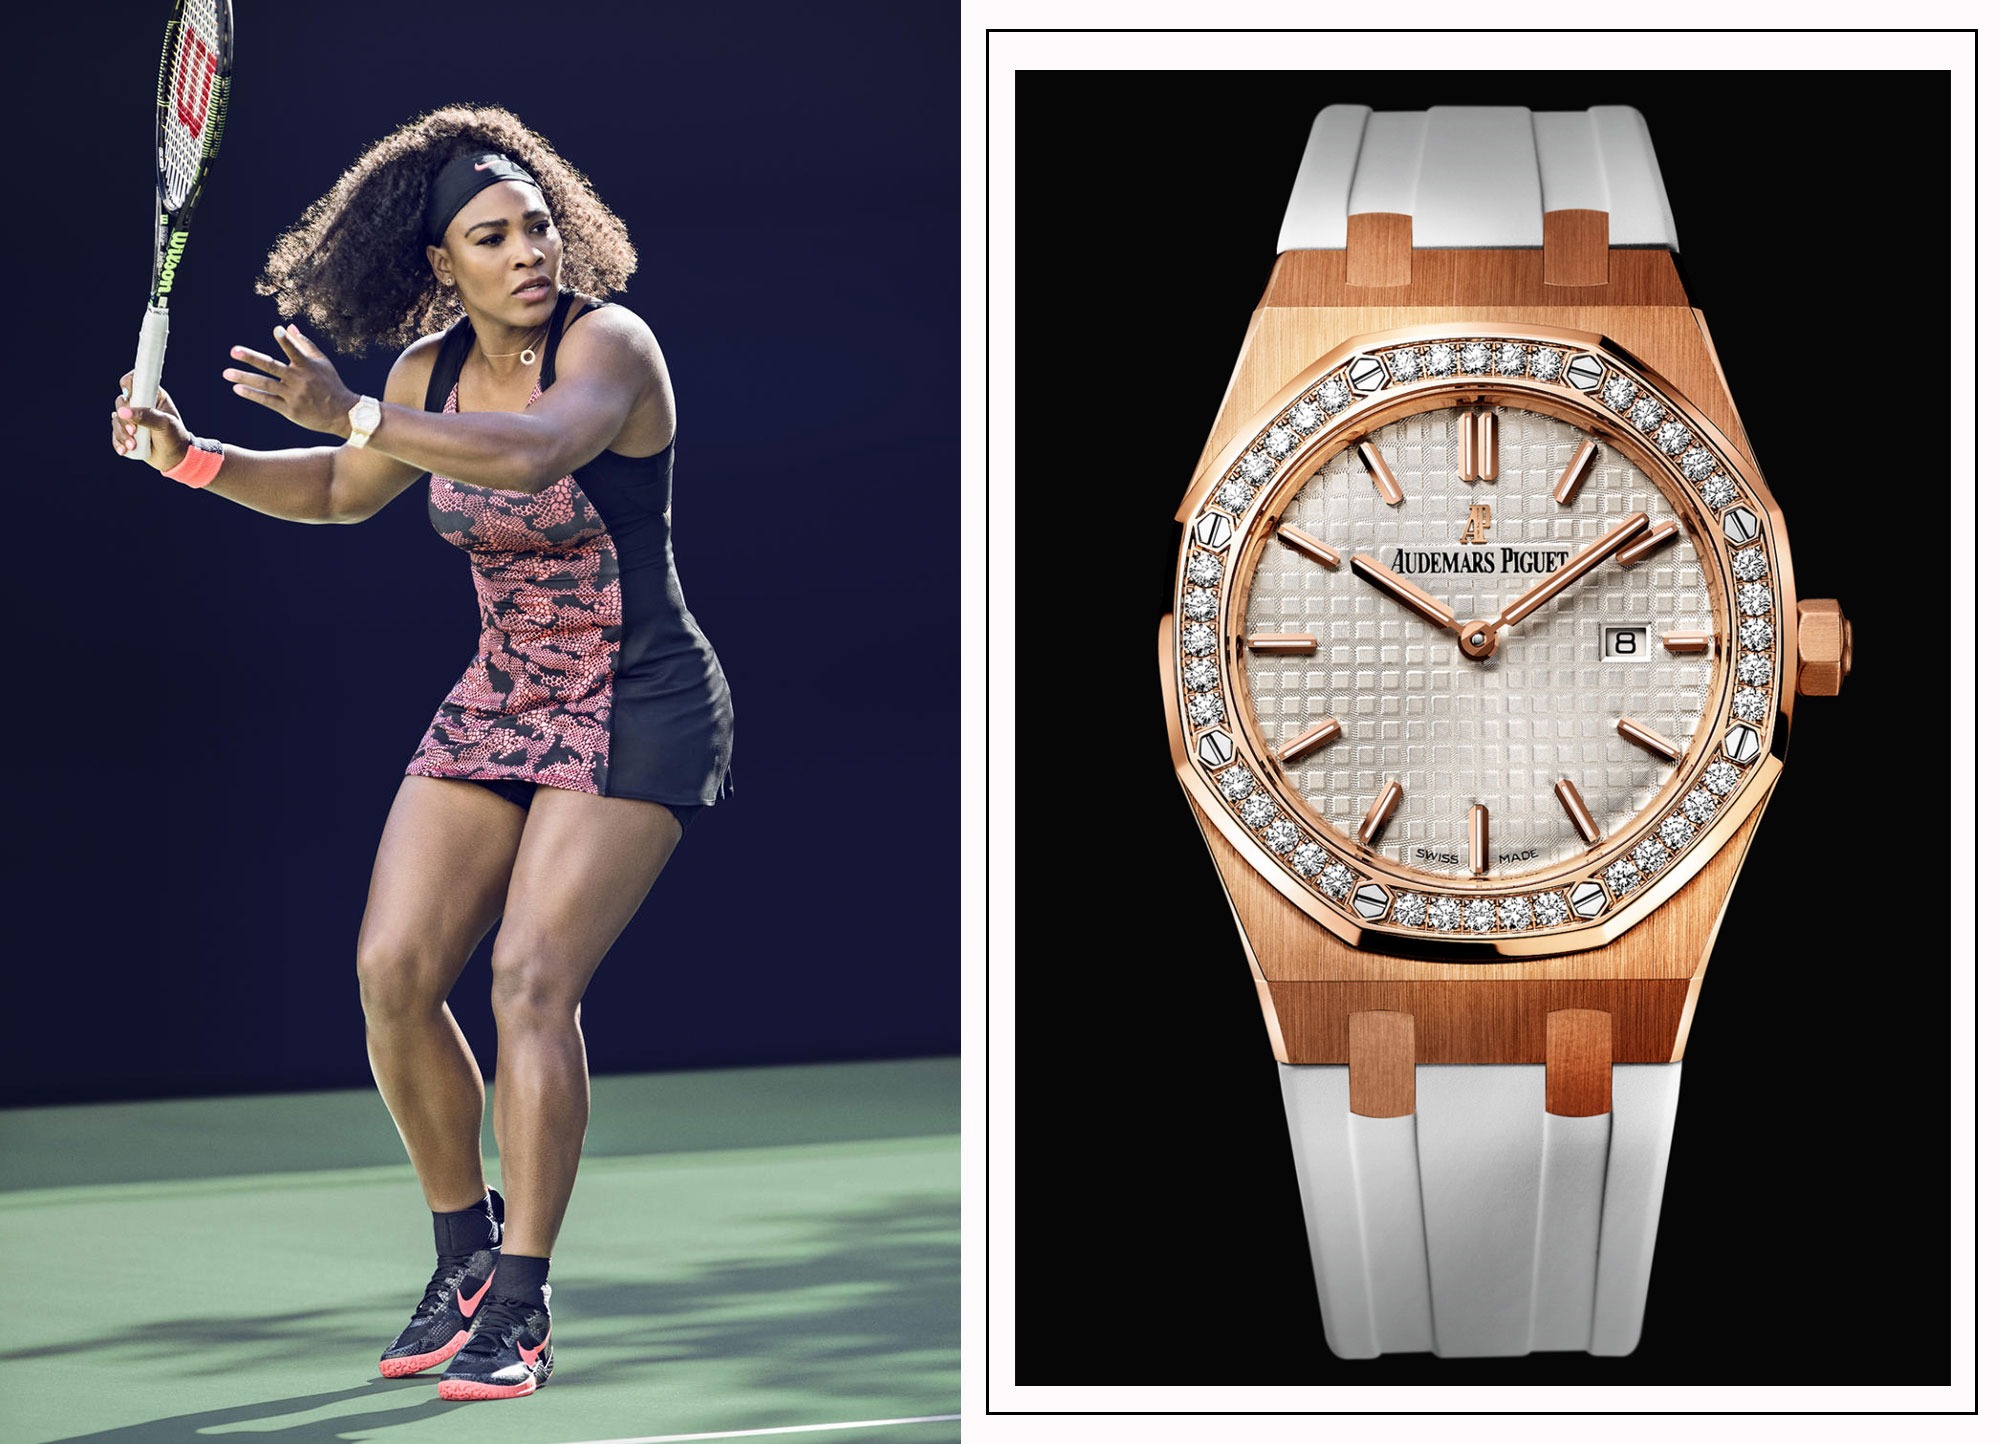 Watches Worn by Top Tennis Players - The Watch Doctor